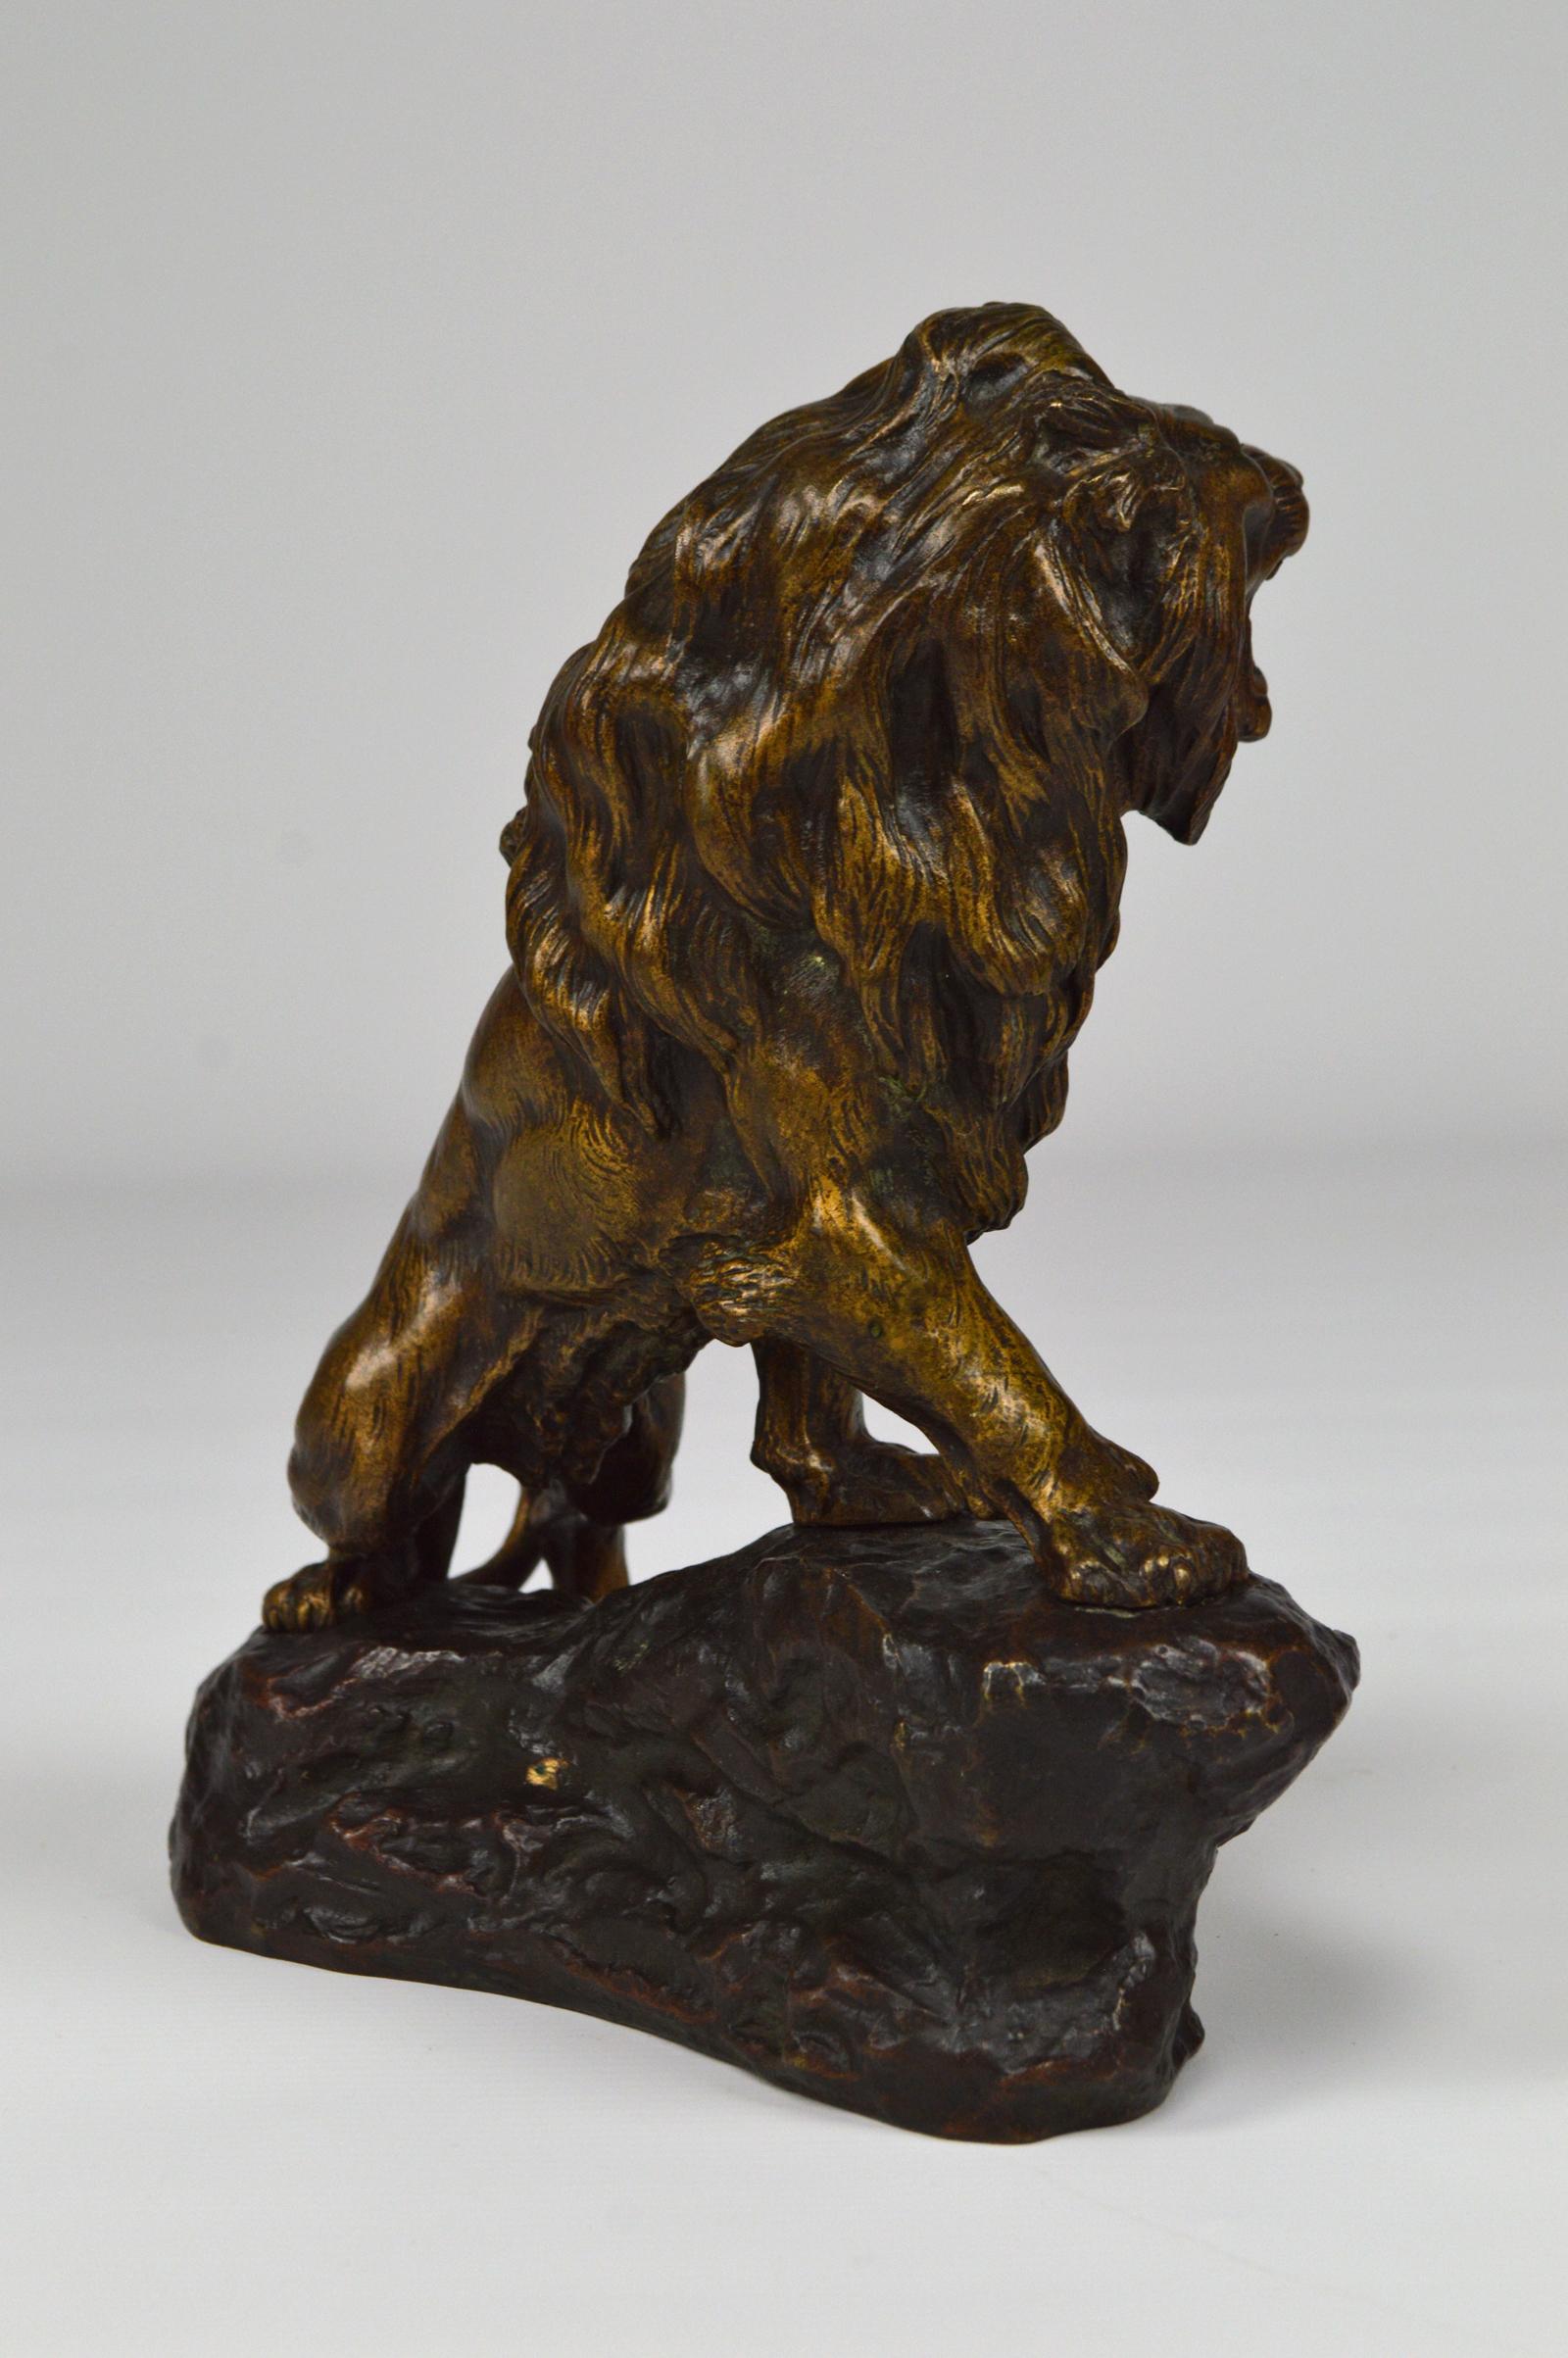 Patinated Snarling Lion in Bronze by Thomas François Cartier, France, Early 20th Century